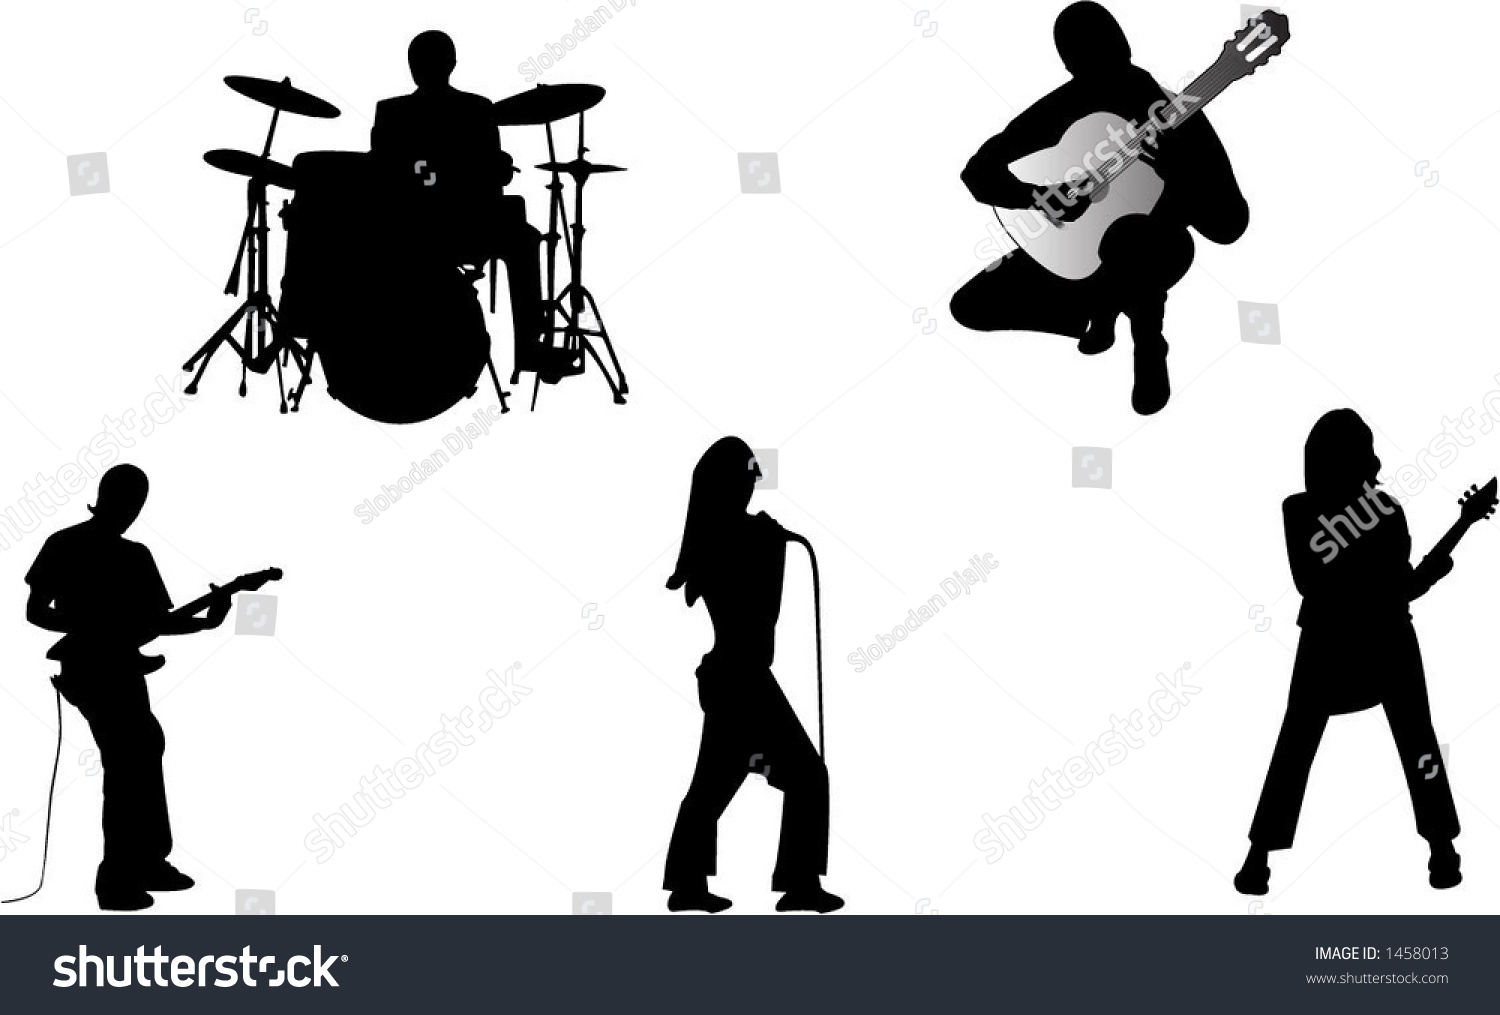 Musicians Band Silhouettes Stock Vector 1458013 - Shutterstock